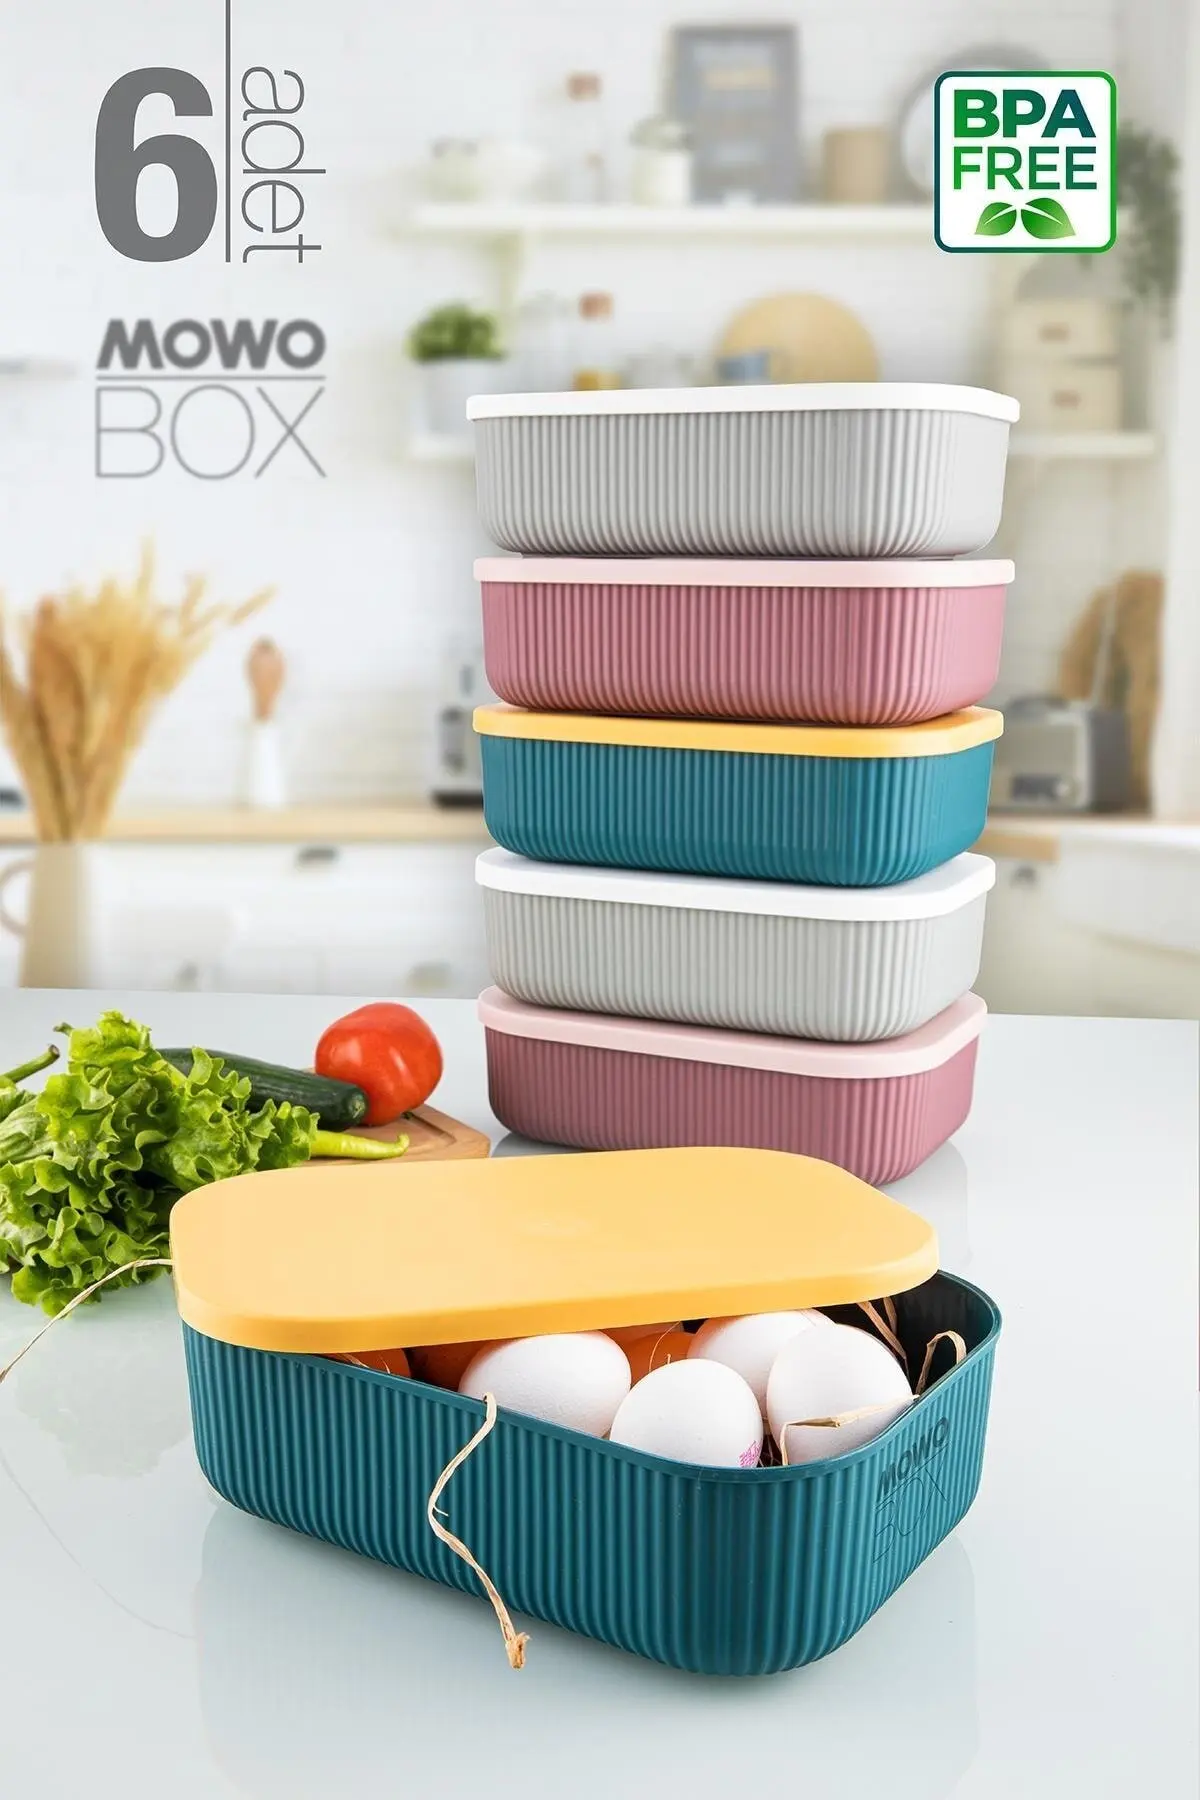 

6 Pieces 3.2 Lt (mix) Kitchen Storage Container Storage box Storage of your vegetables, fruits, dry food, cake and pastry